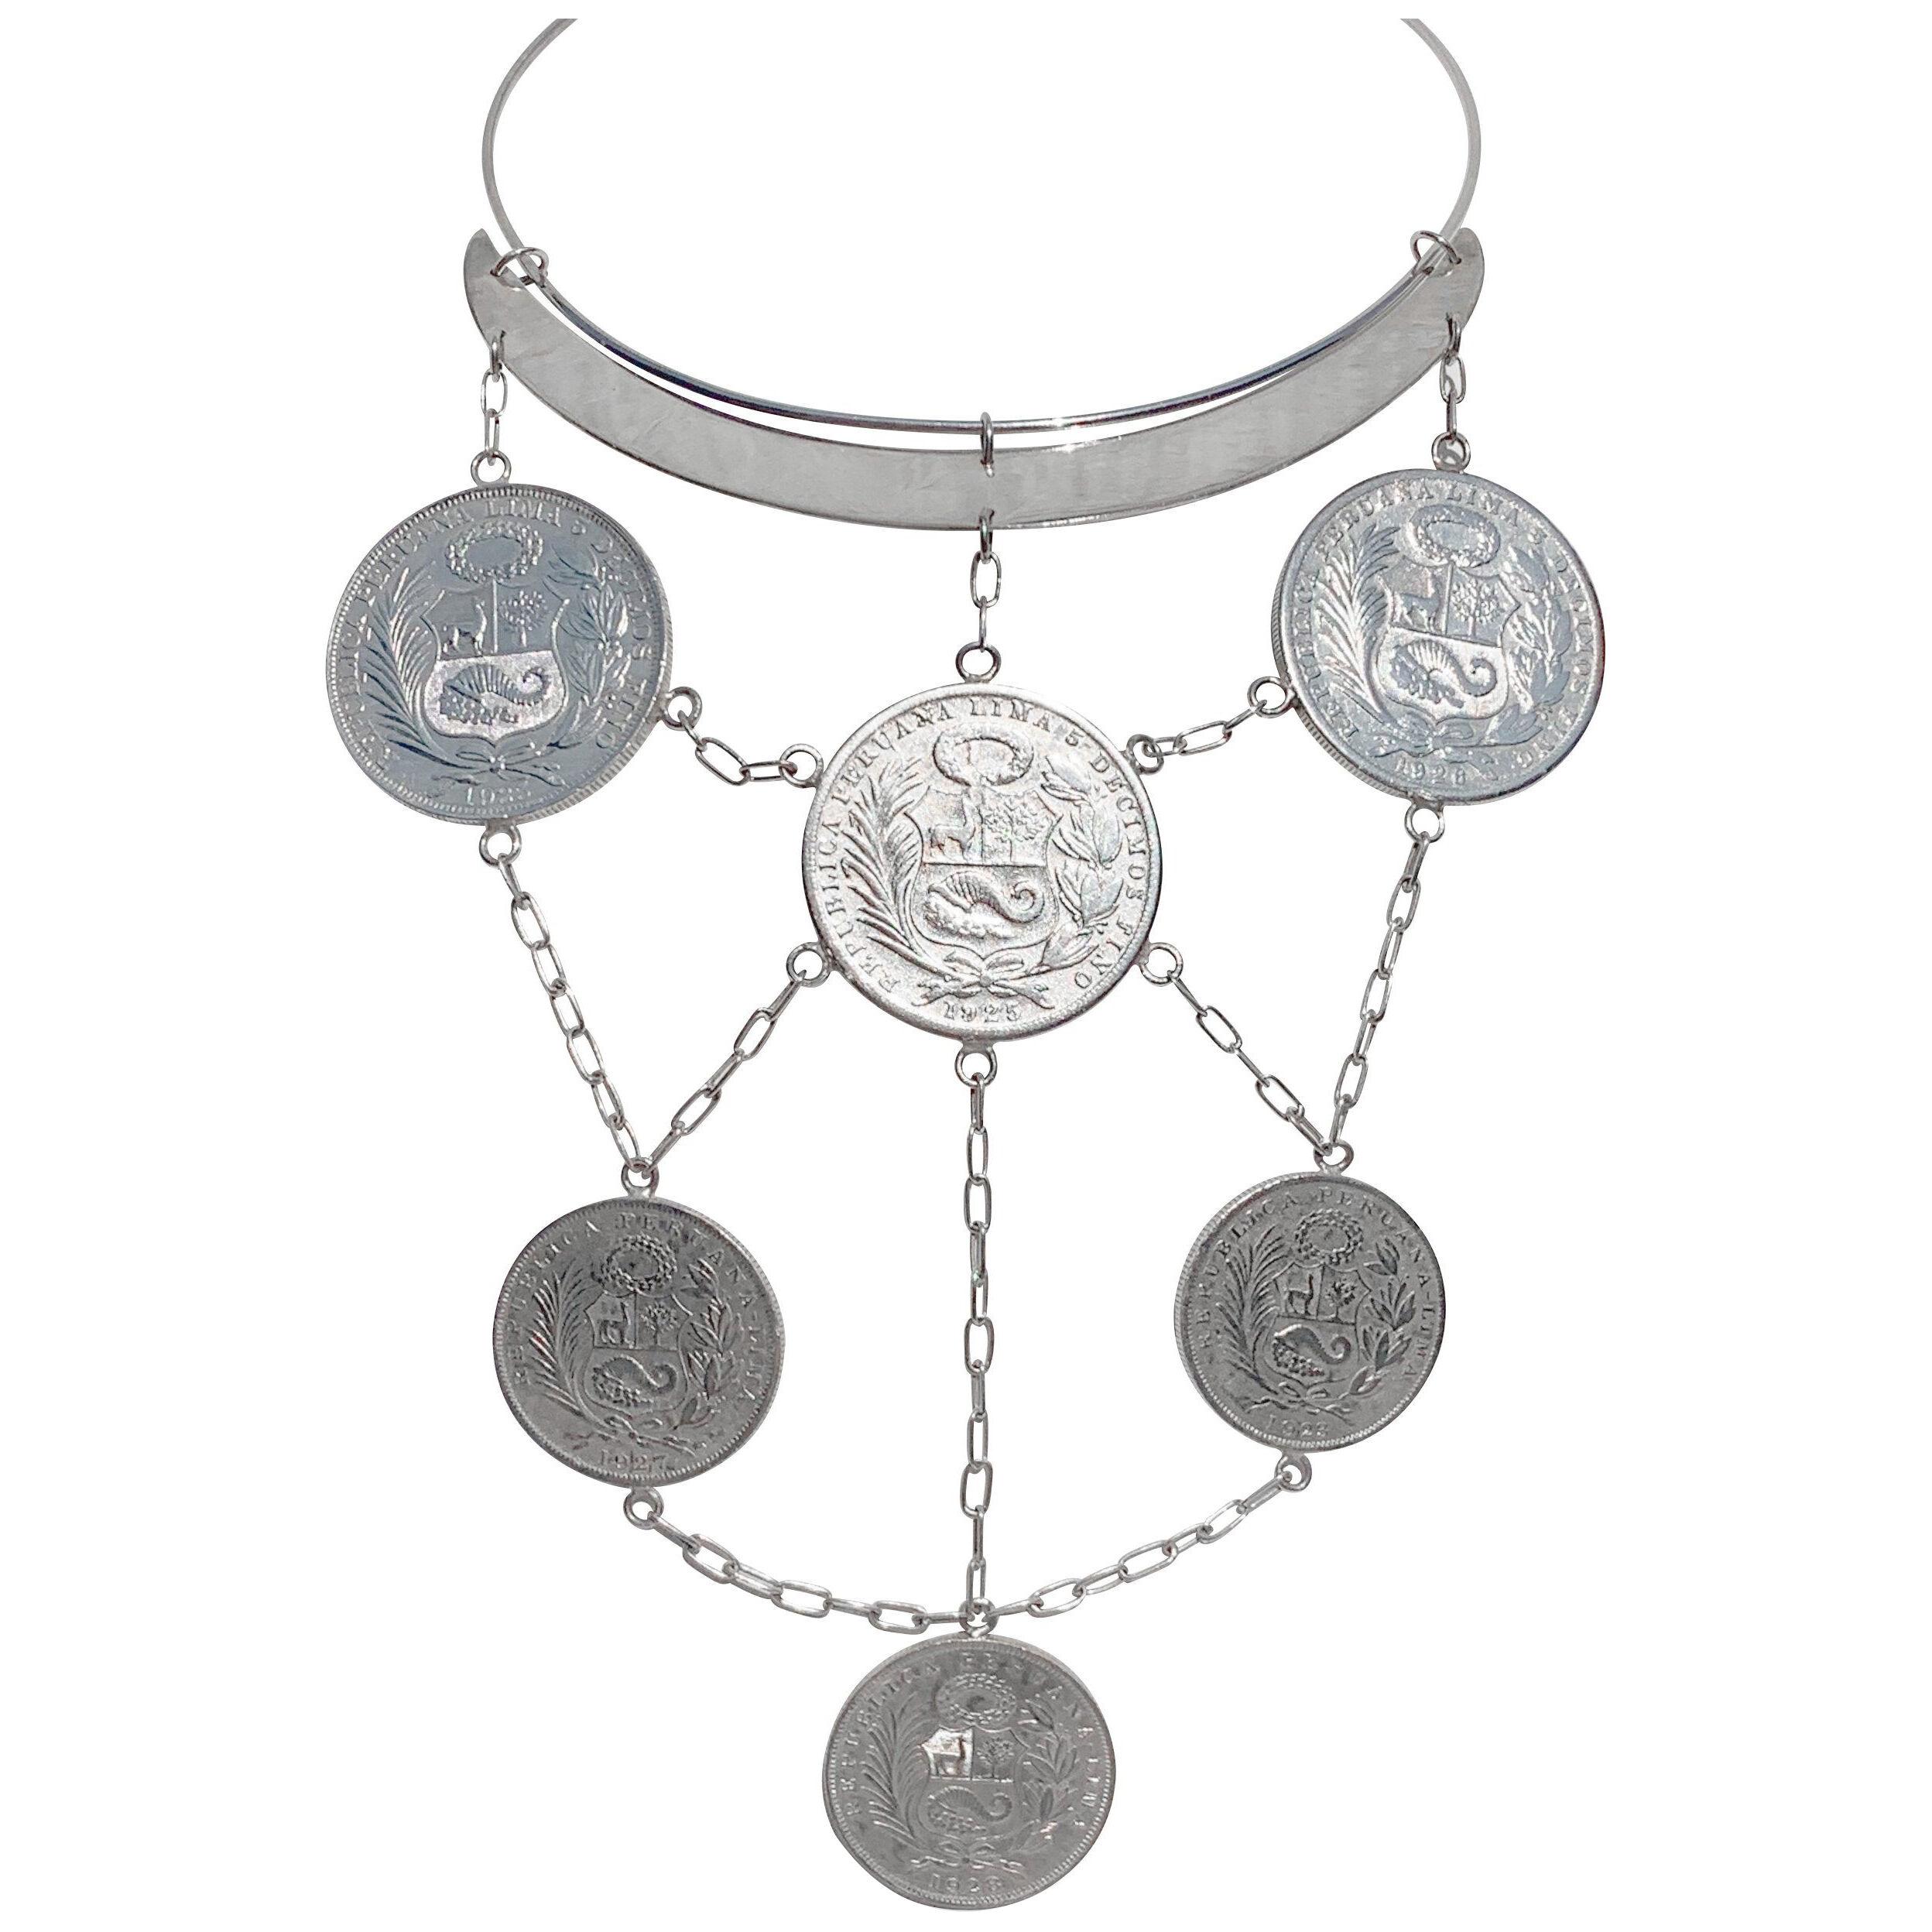 Peruvian 1920s to 1930s Coins Necklace